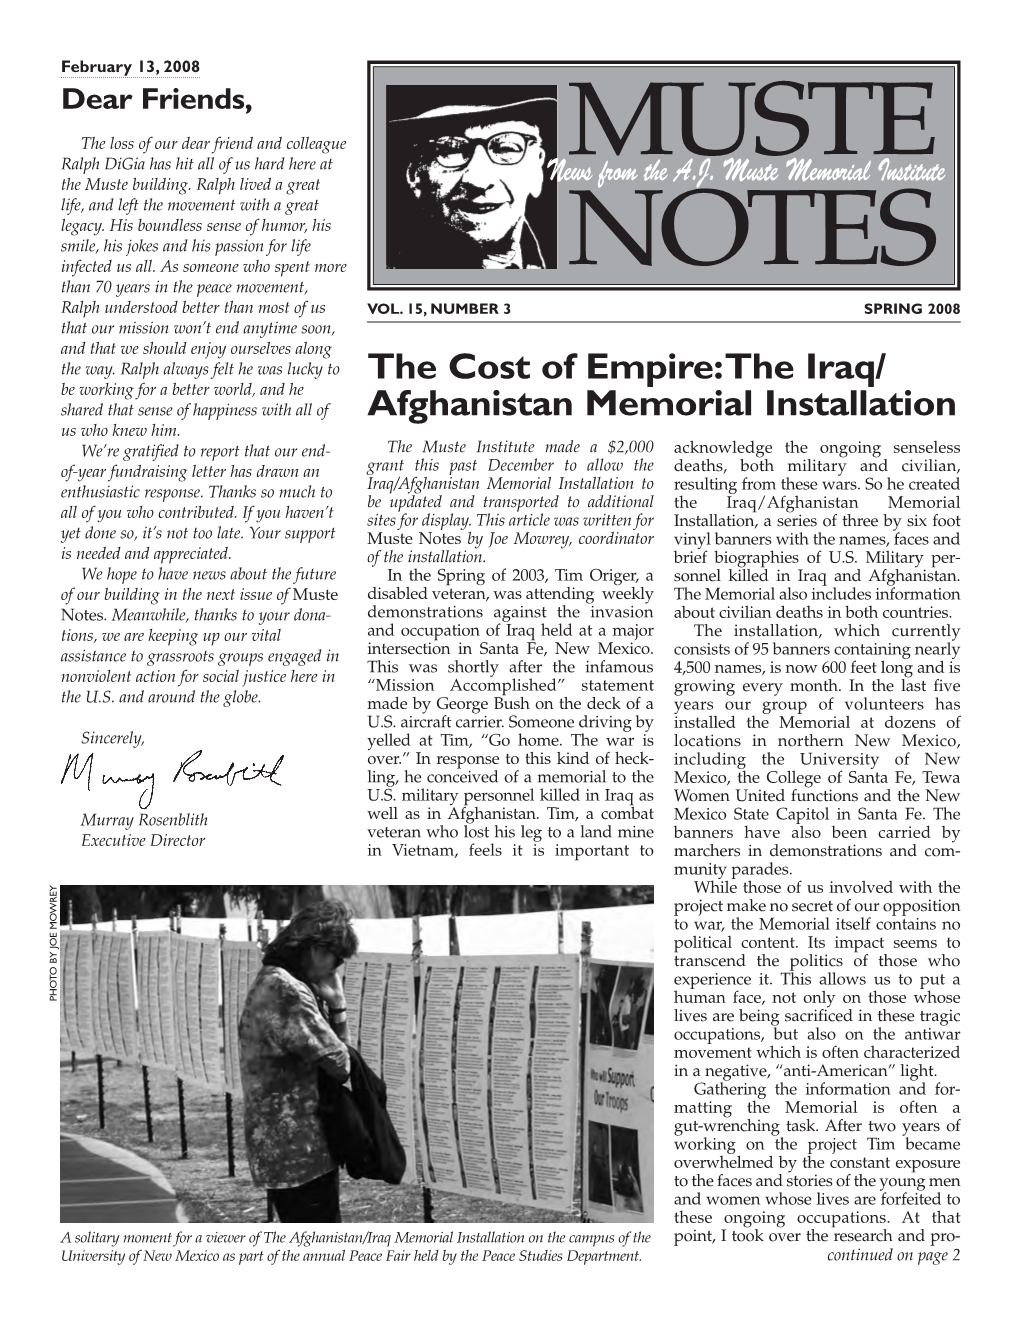 The Cost of Empire:The Iraq/ Afghanistan Memorial Installation